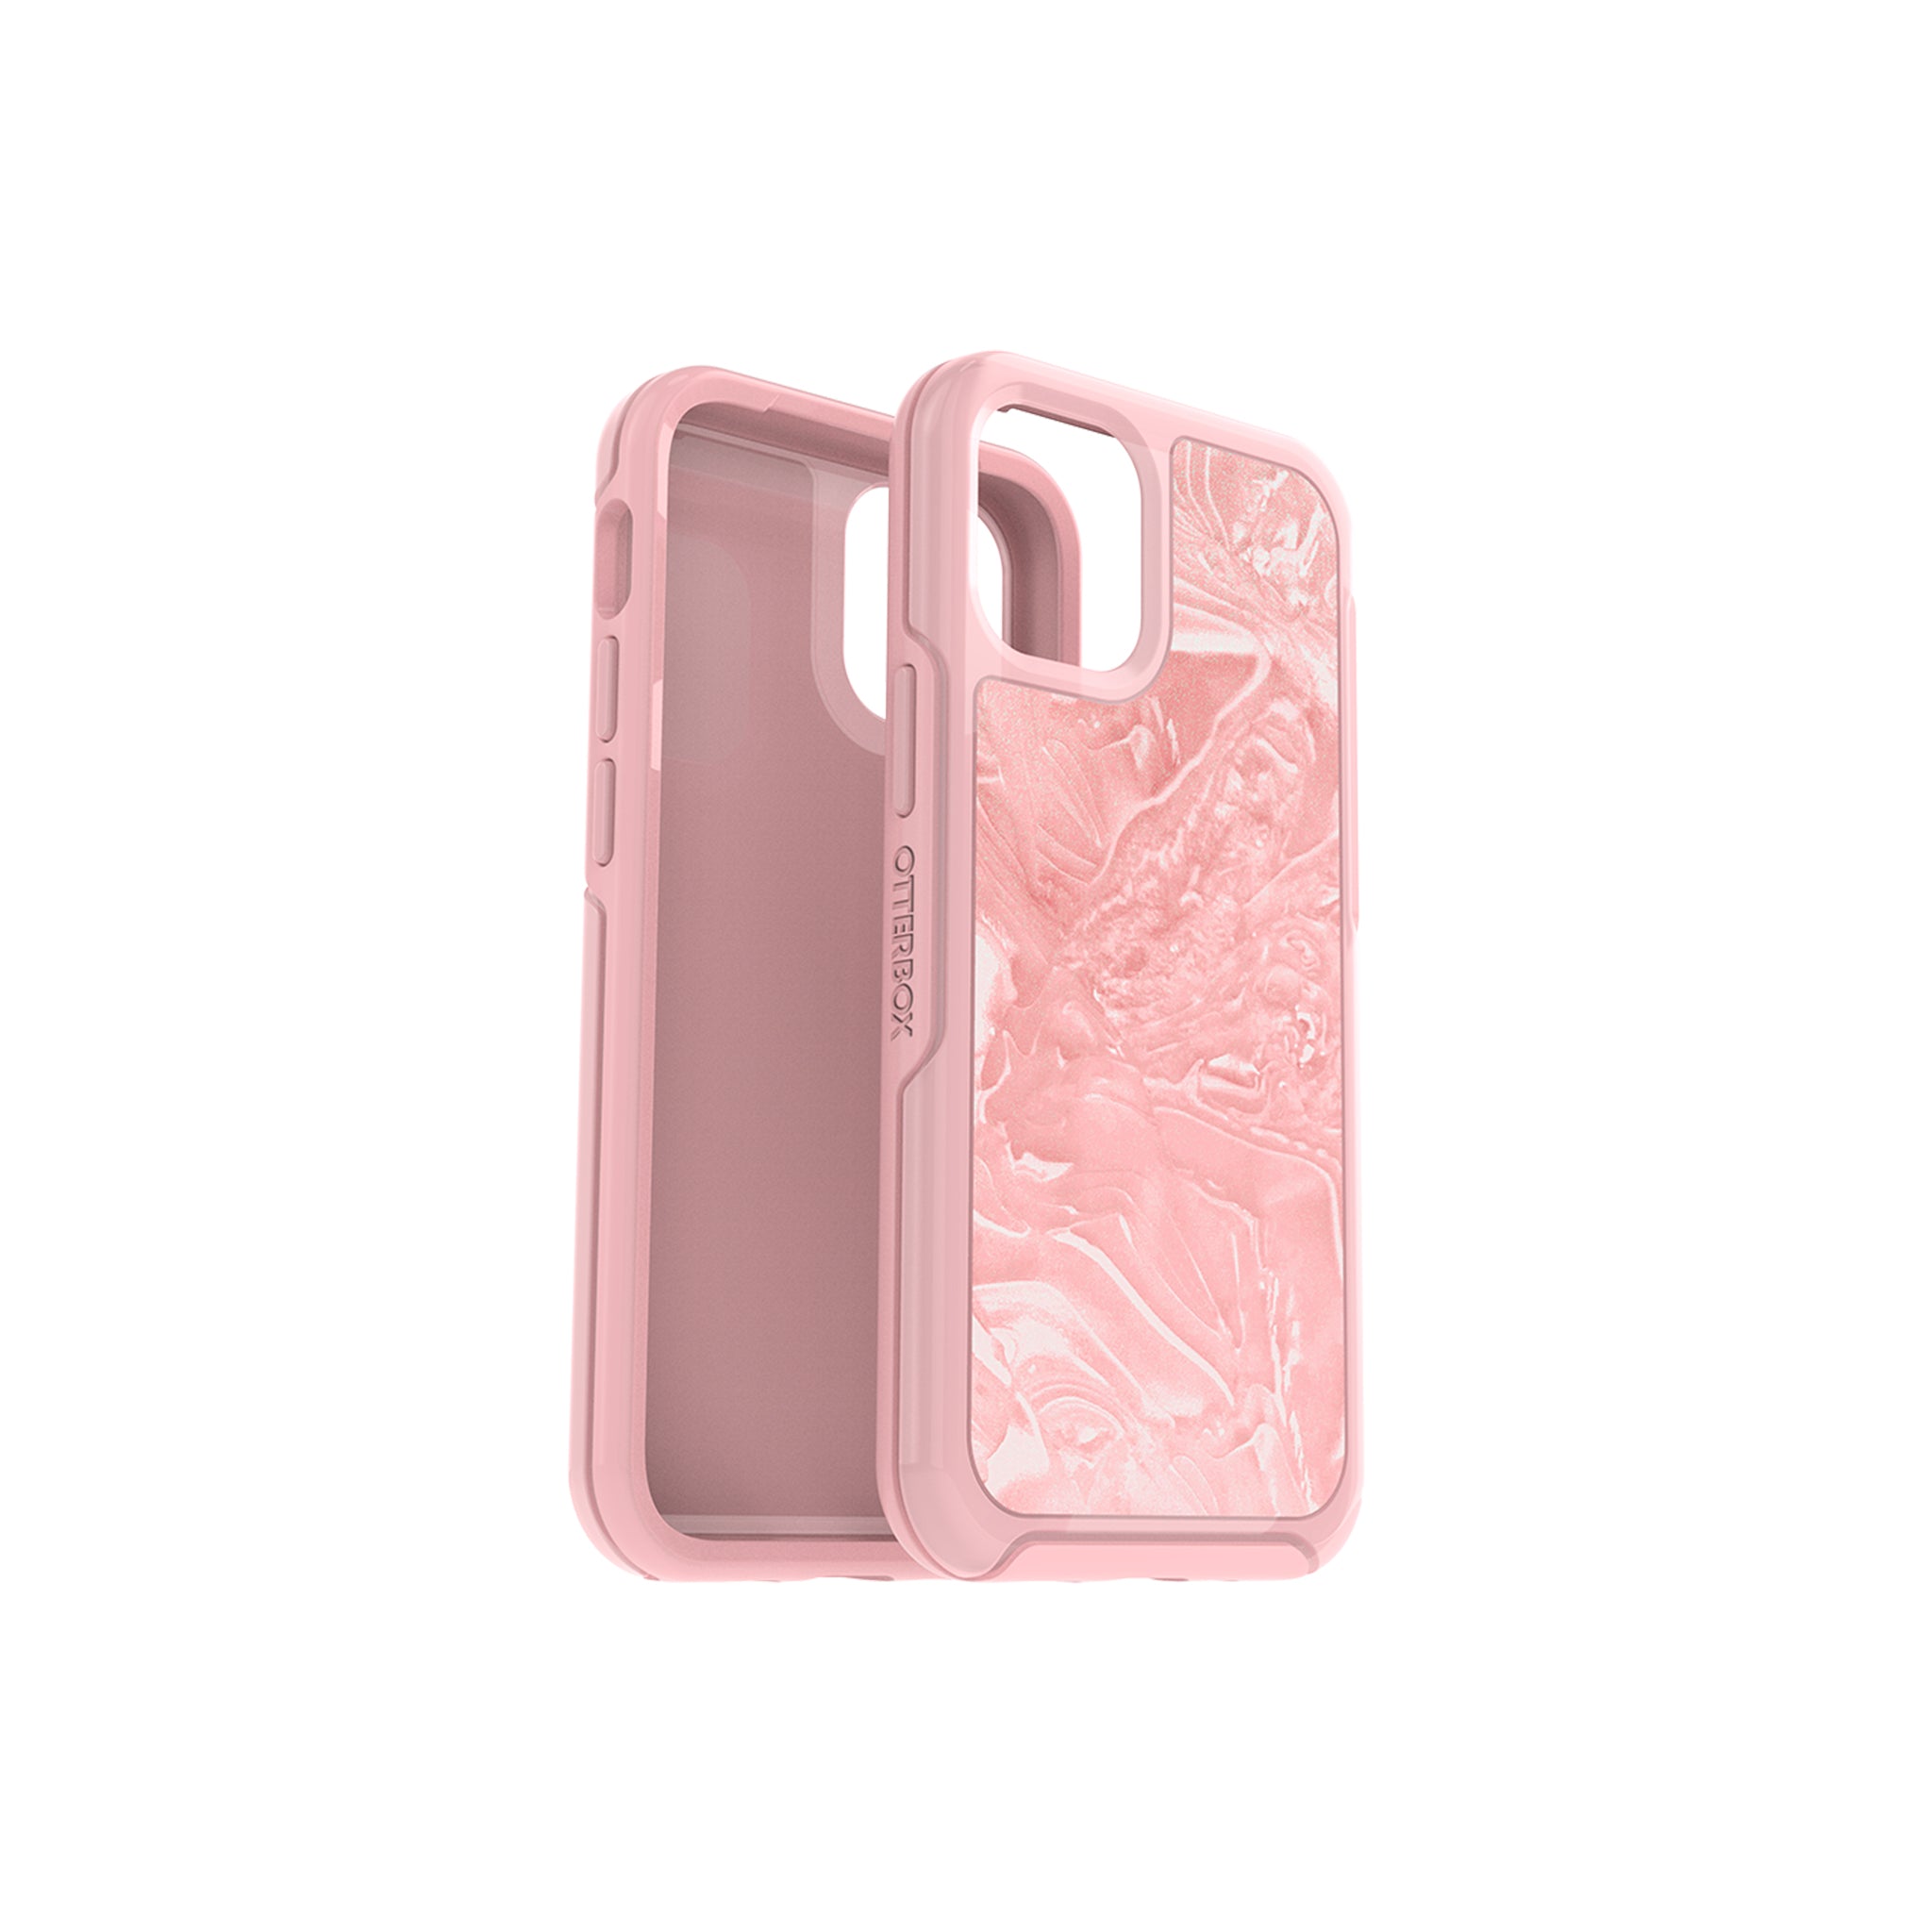 OtterBox - Symmetry Clear for Iphone 12 Mini - SHELL SHOCKED